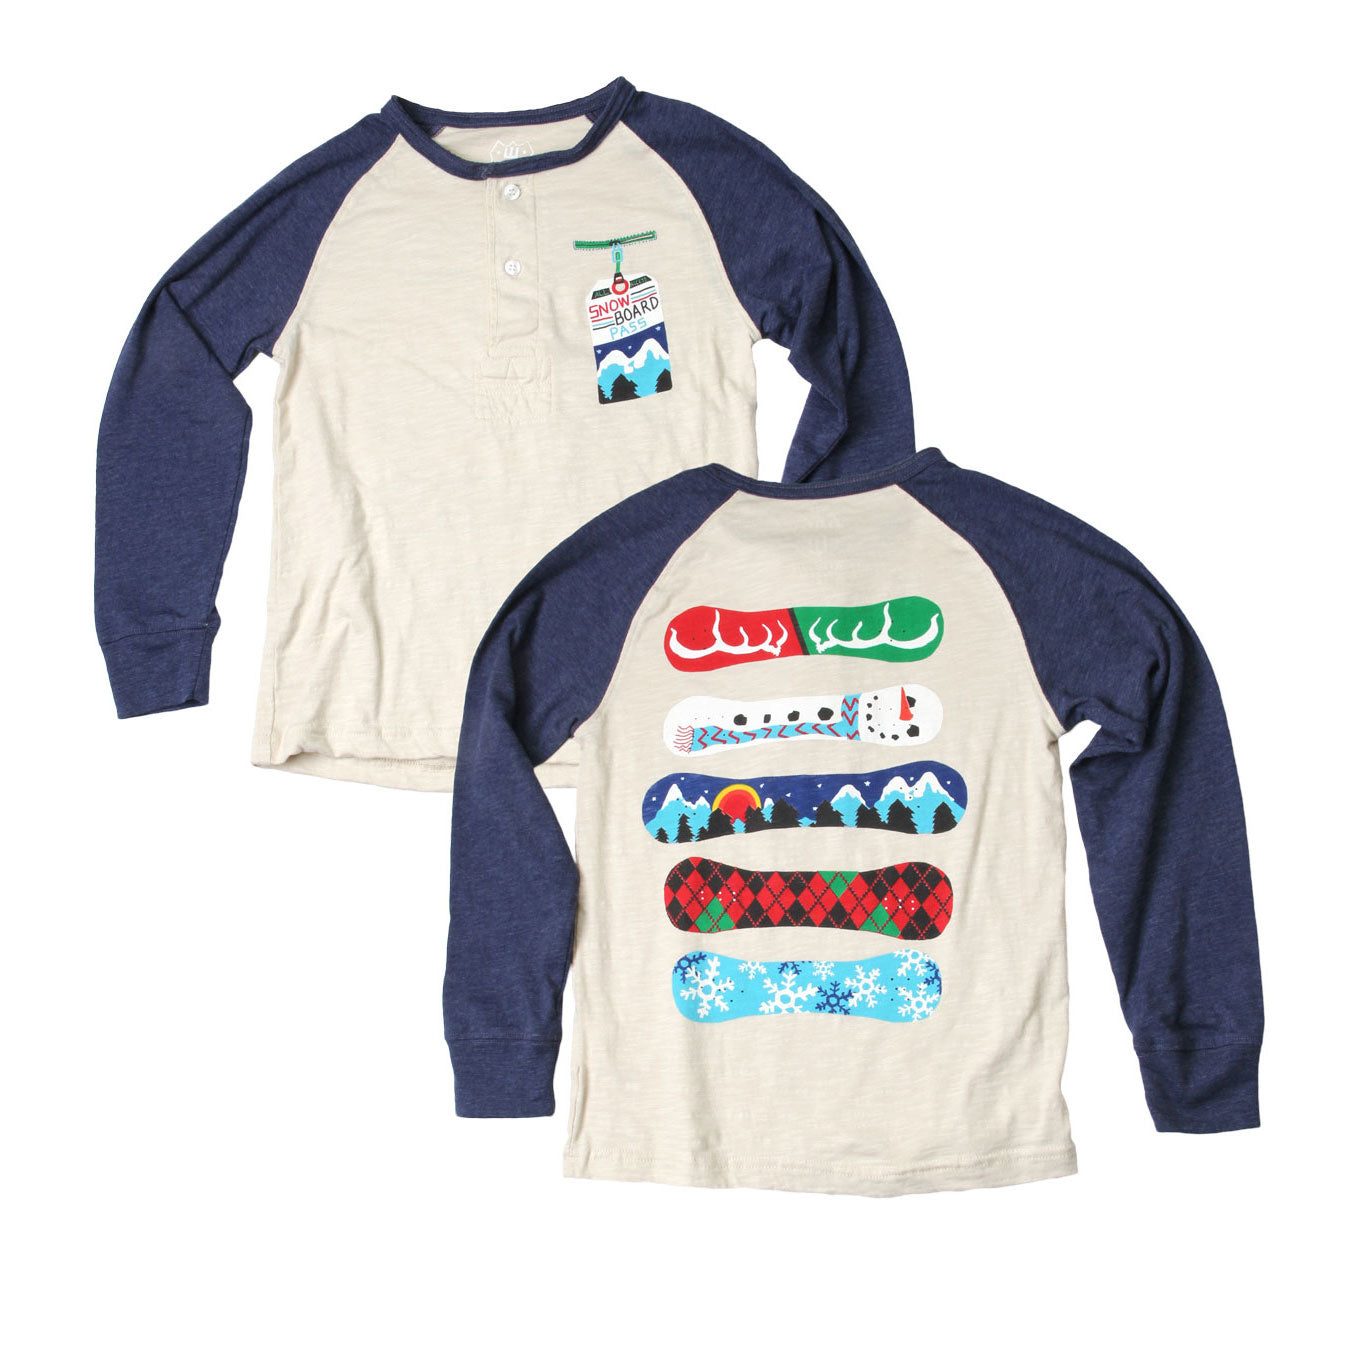 Boys' Snowboard Raglan Henley by Wes and Willy